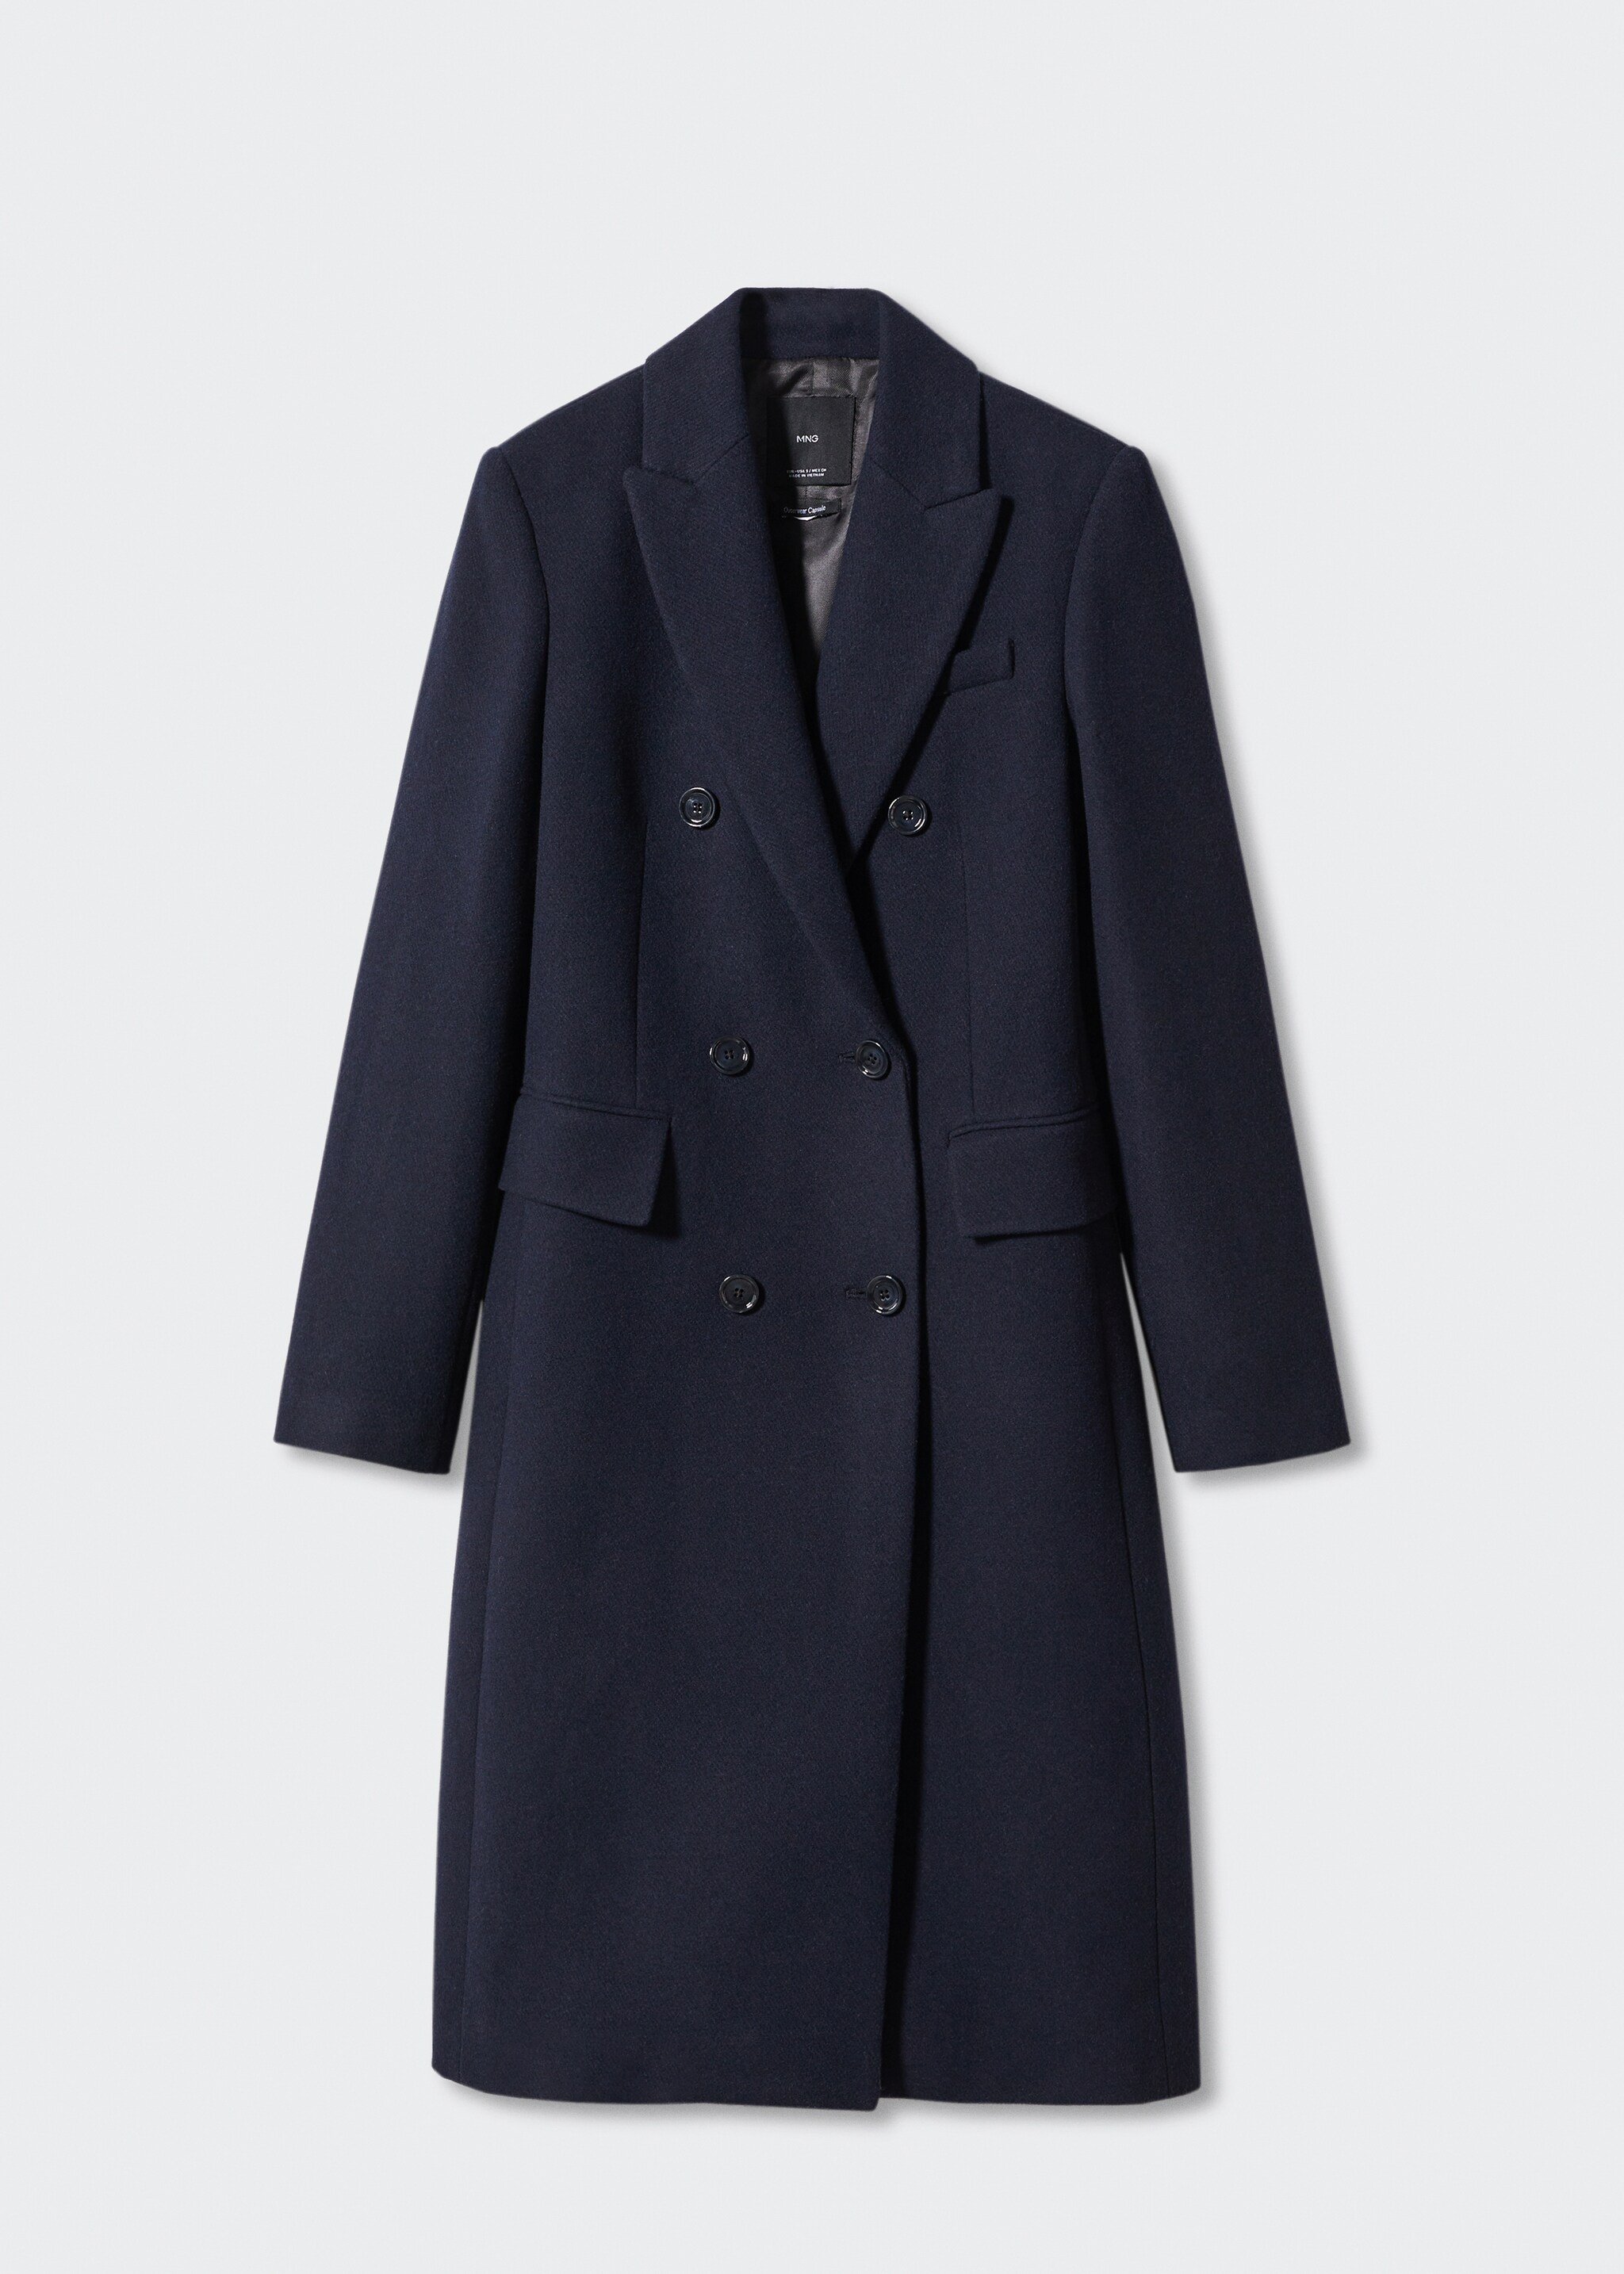 Tailored wool coat - Article without model